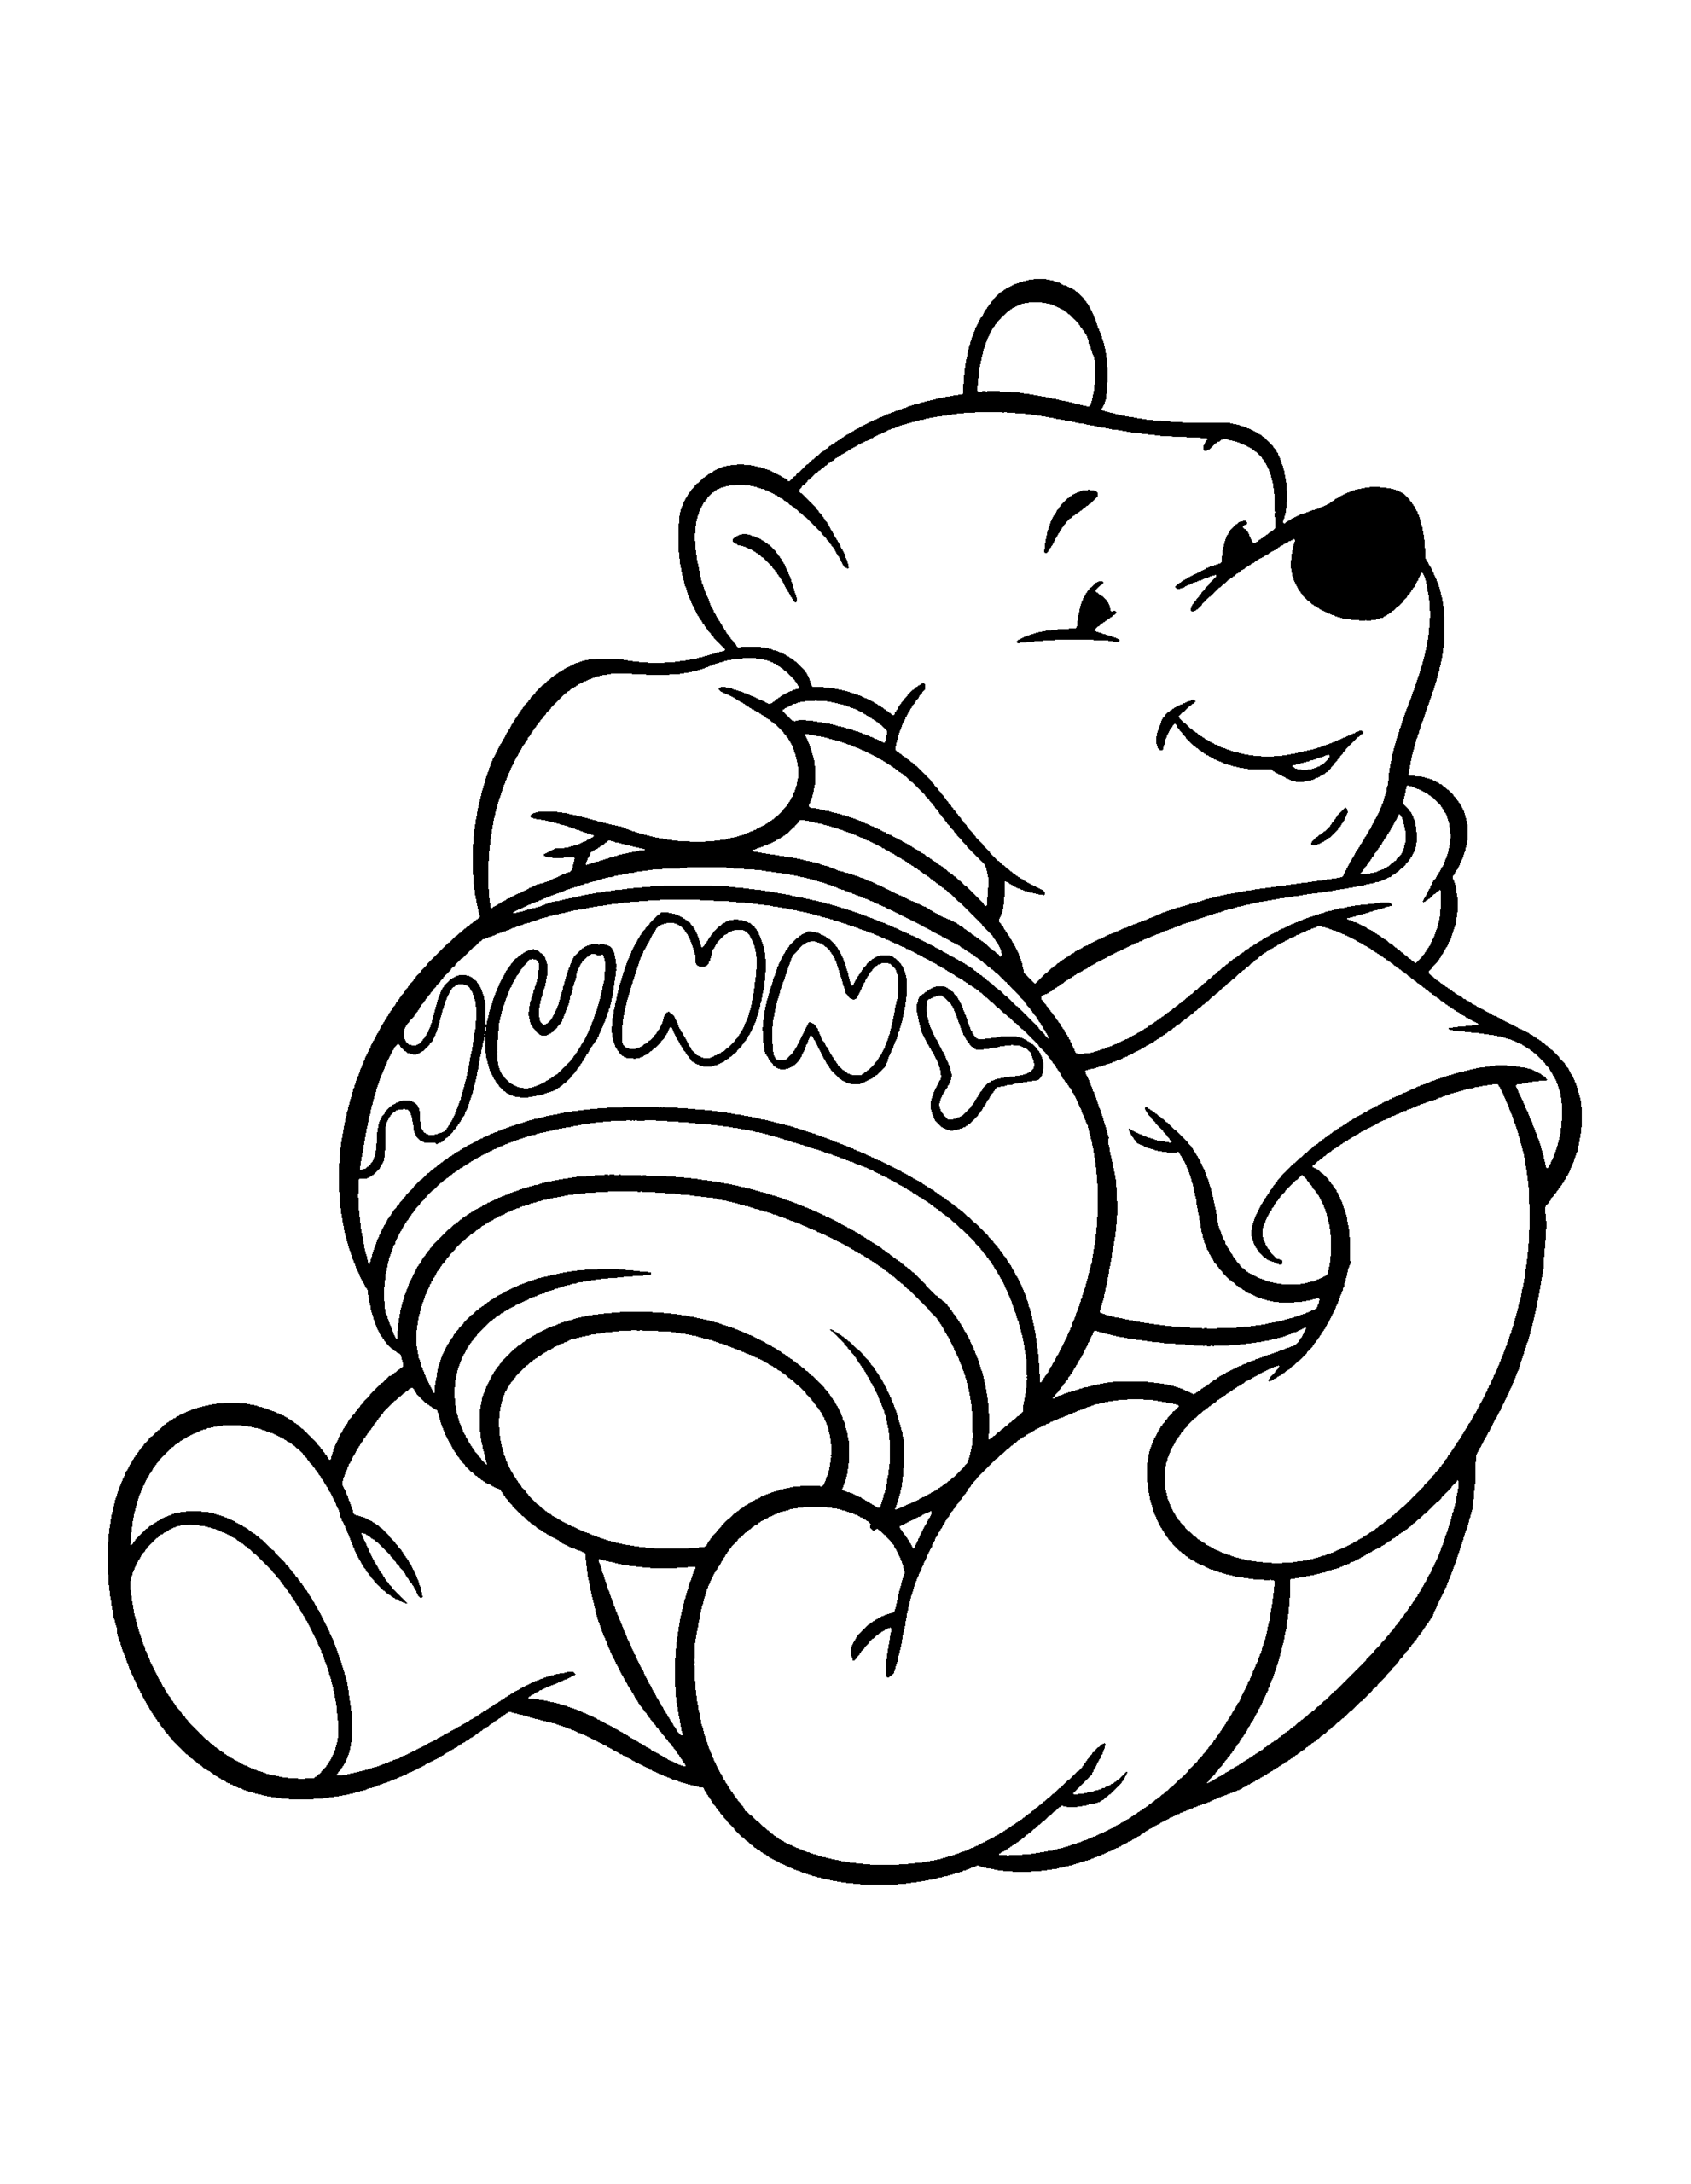 Winnie the Pooh Coloring Pages Cartoons winnie the pooh 74 Printable 2020 7193 Coloring4free